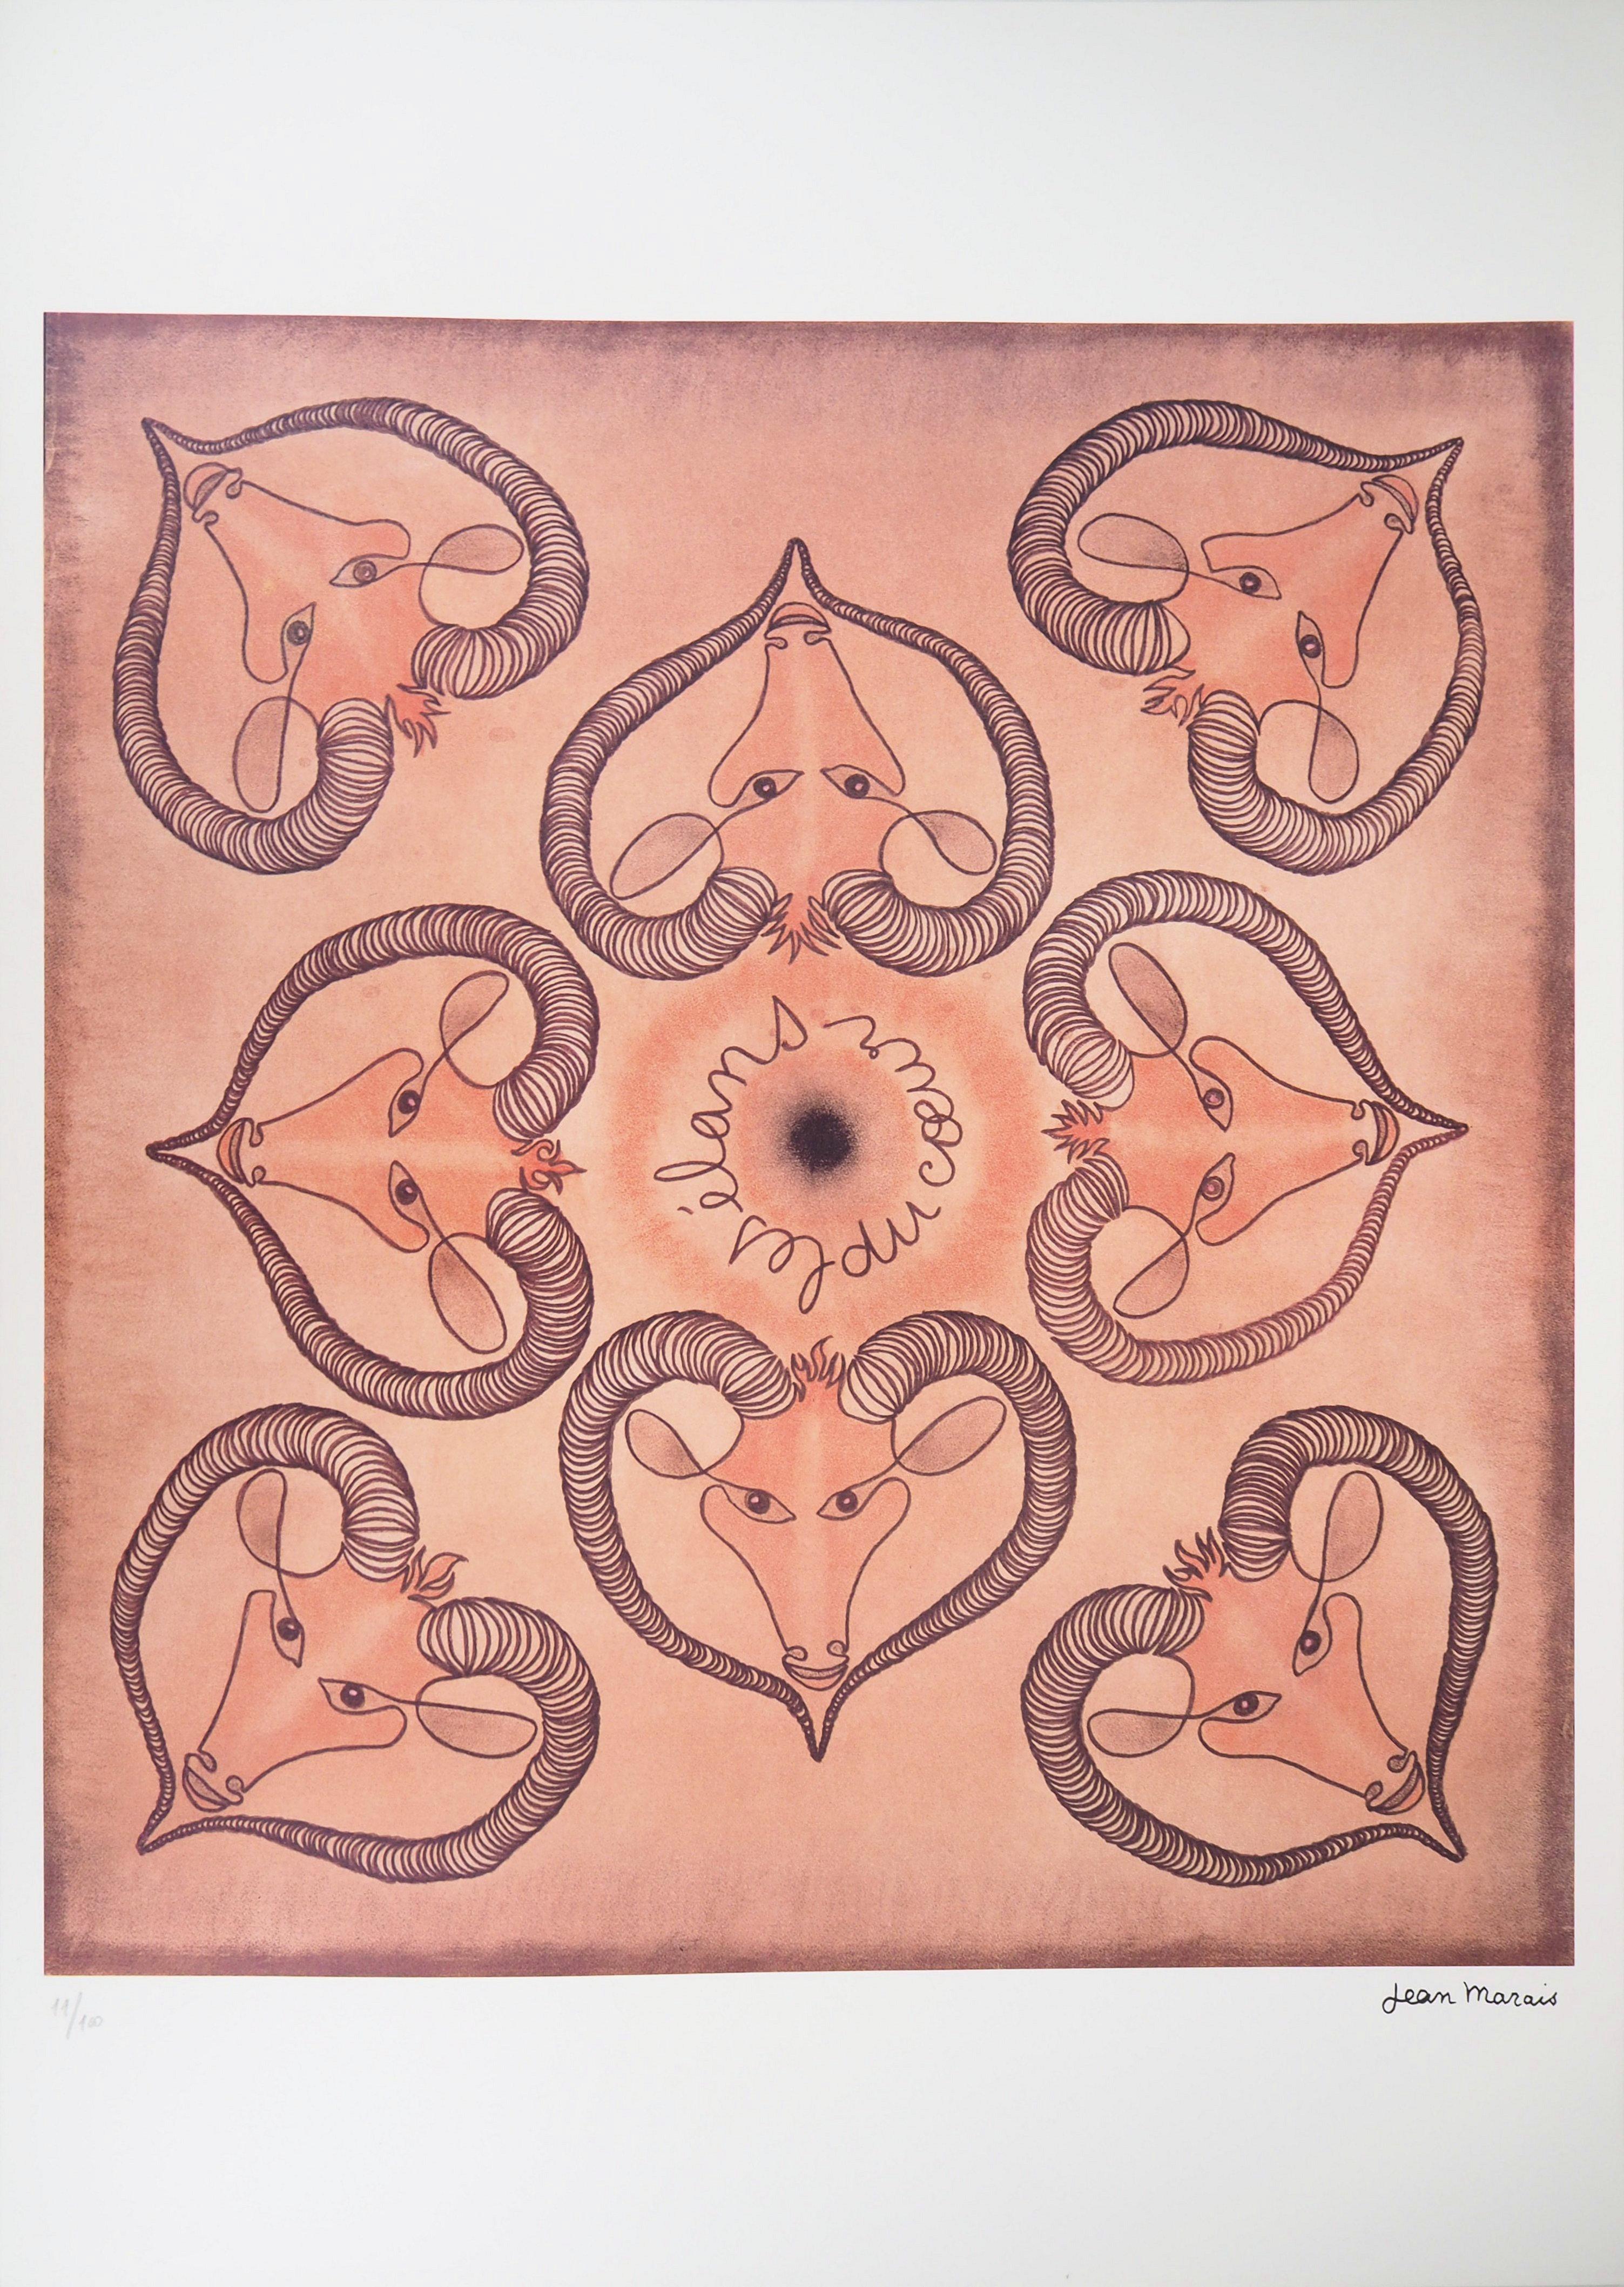 Astrology & Zodiac : Aries "Impulses of the Heart" - Lithograph, Ltd 100 copies